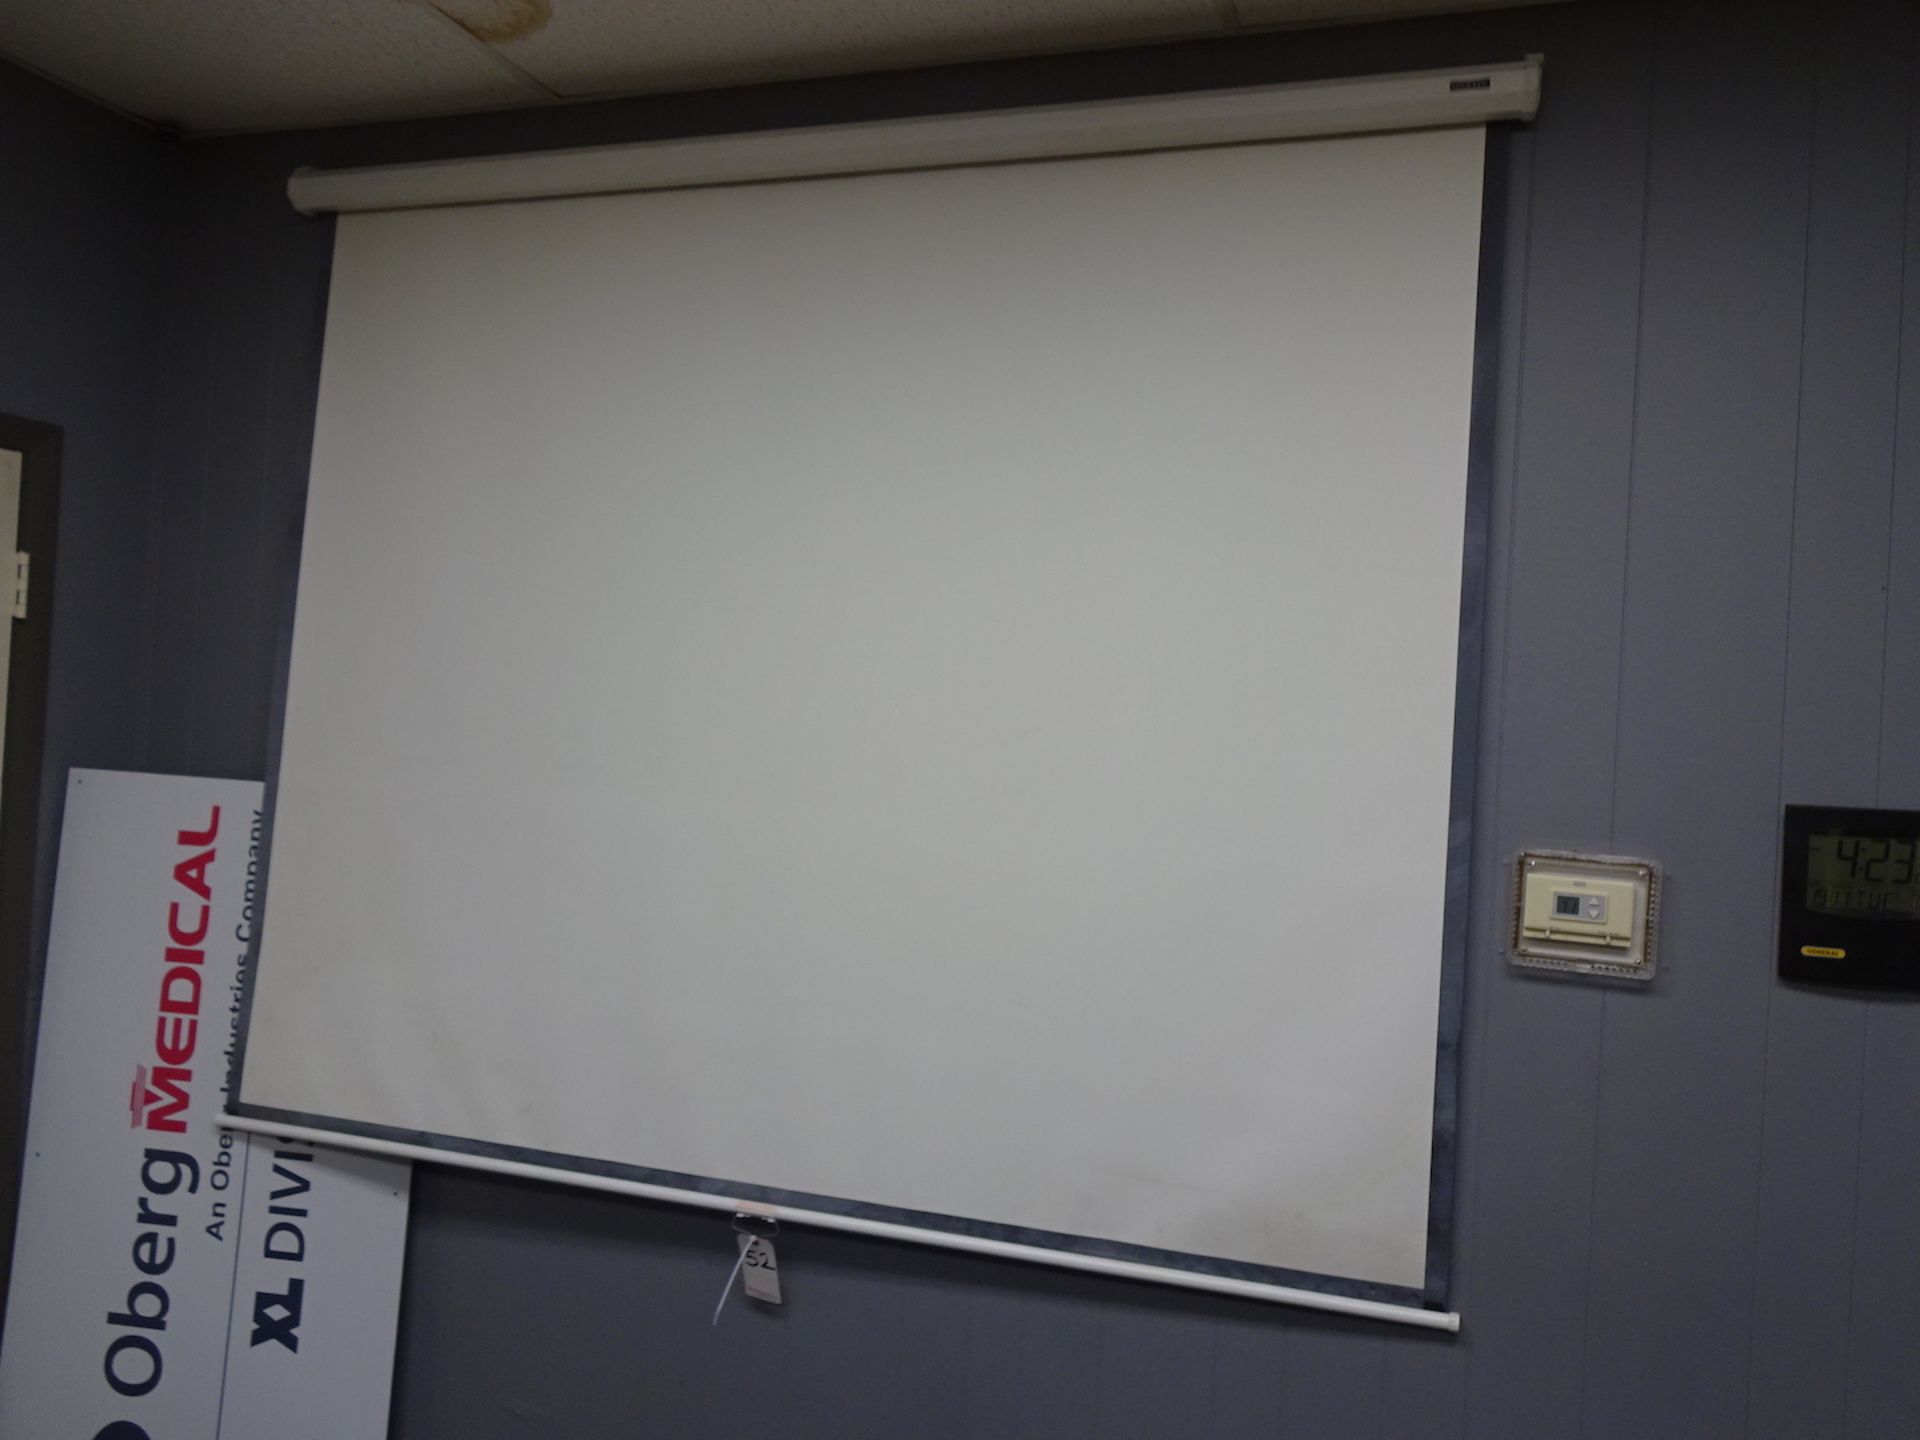 Epson Ceiling Mounted Projector, with Da-Lite Projection Screen (Elk Grove Village, IL) - Image 3 of 3